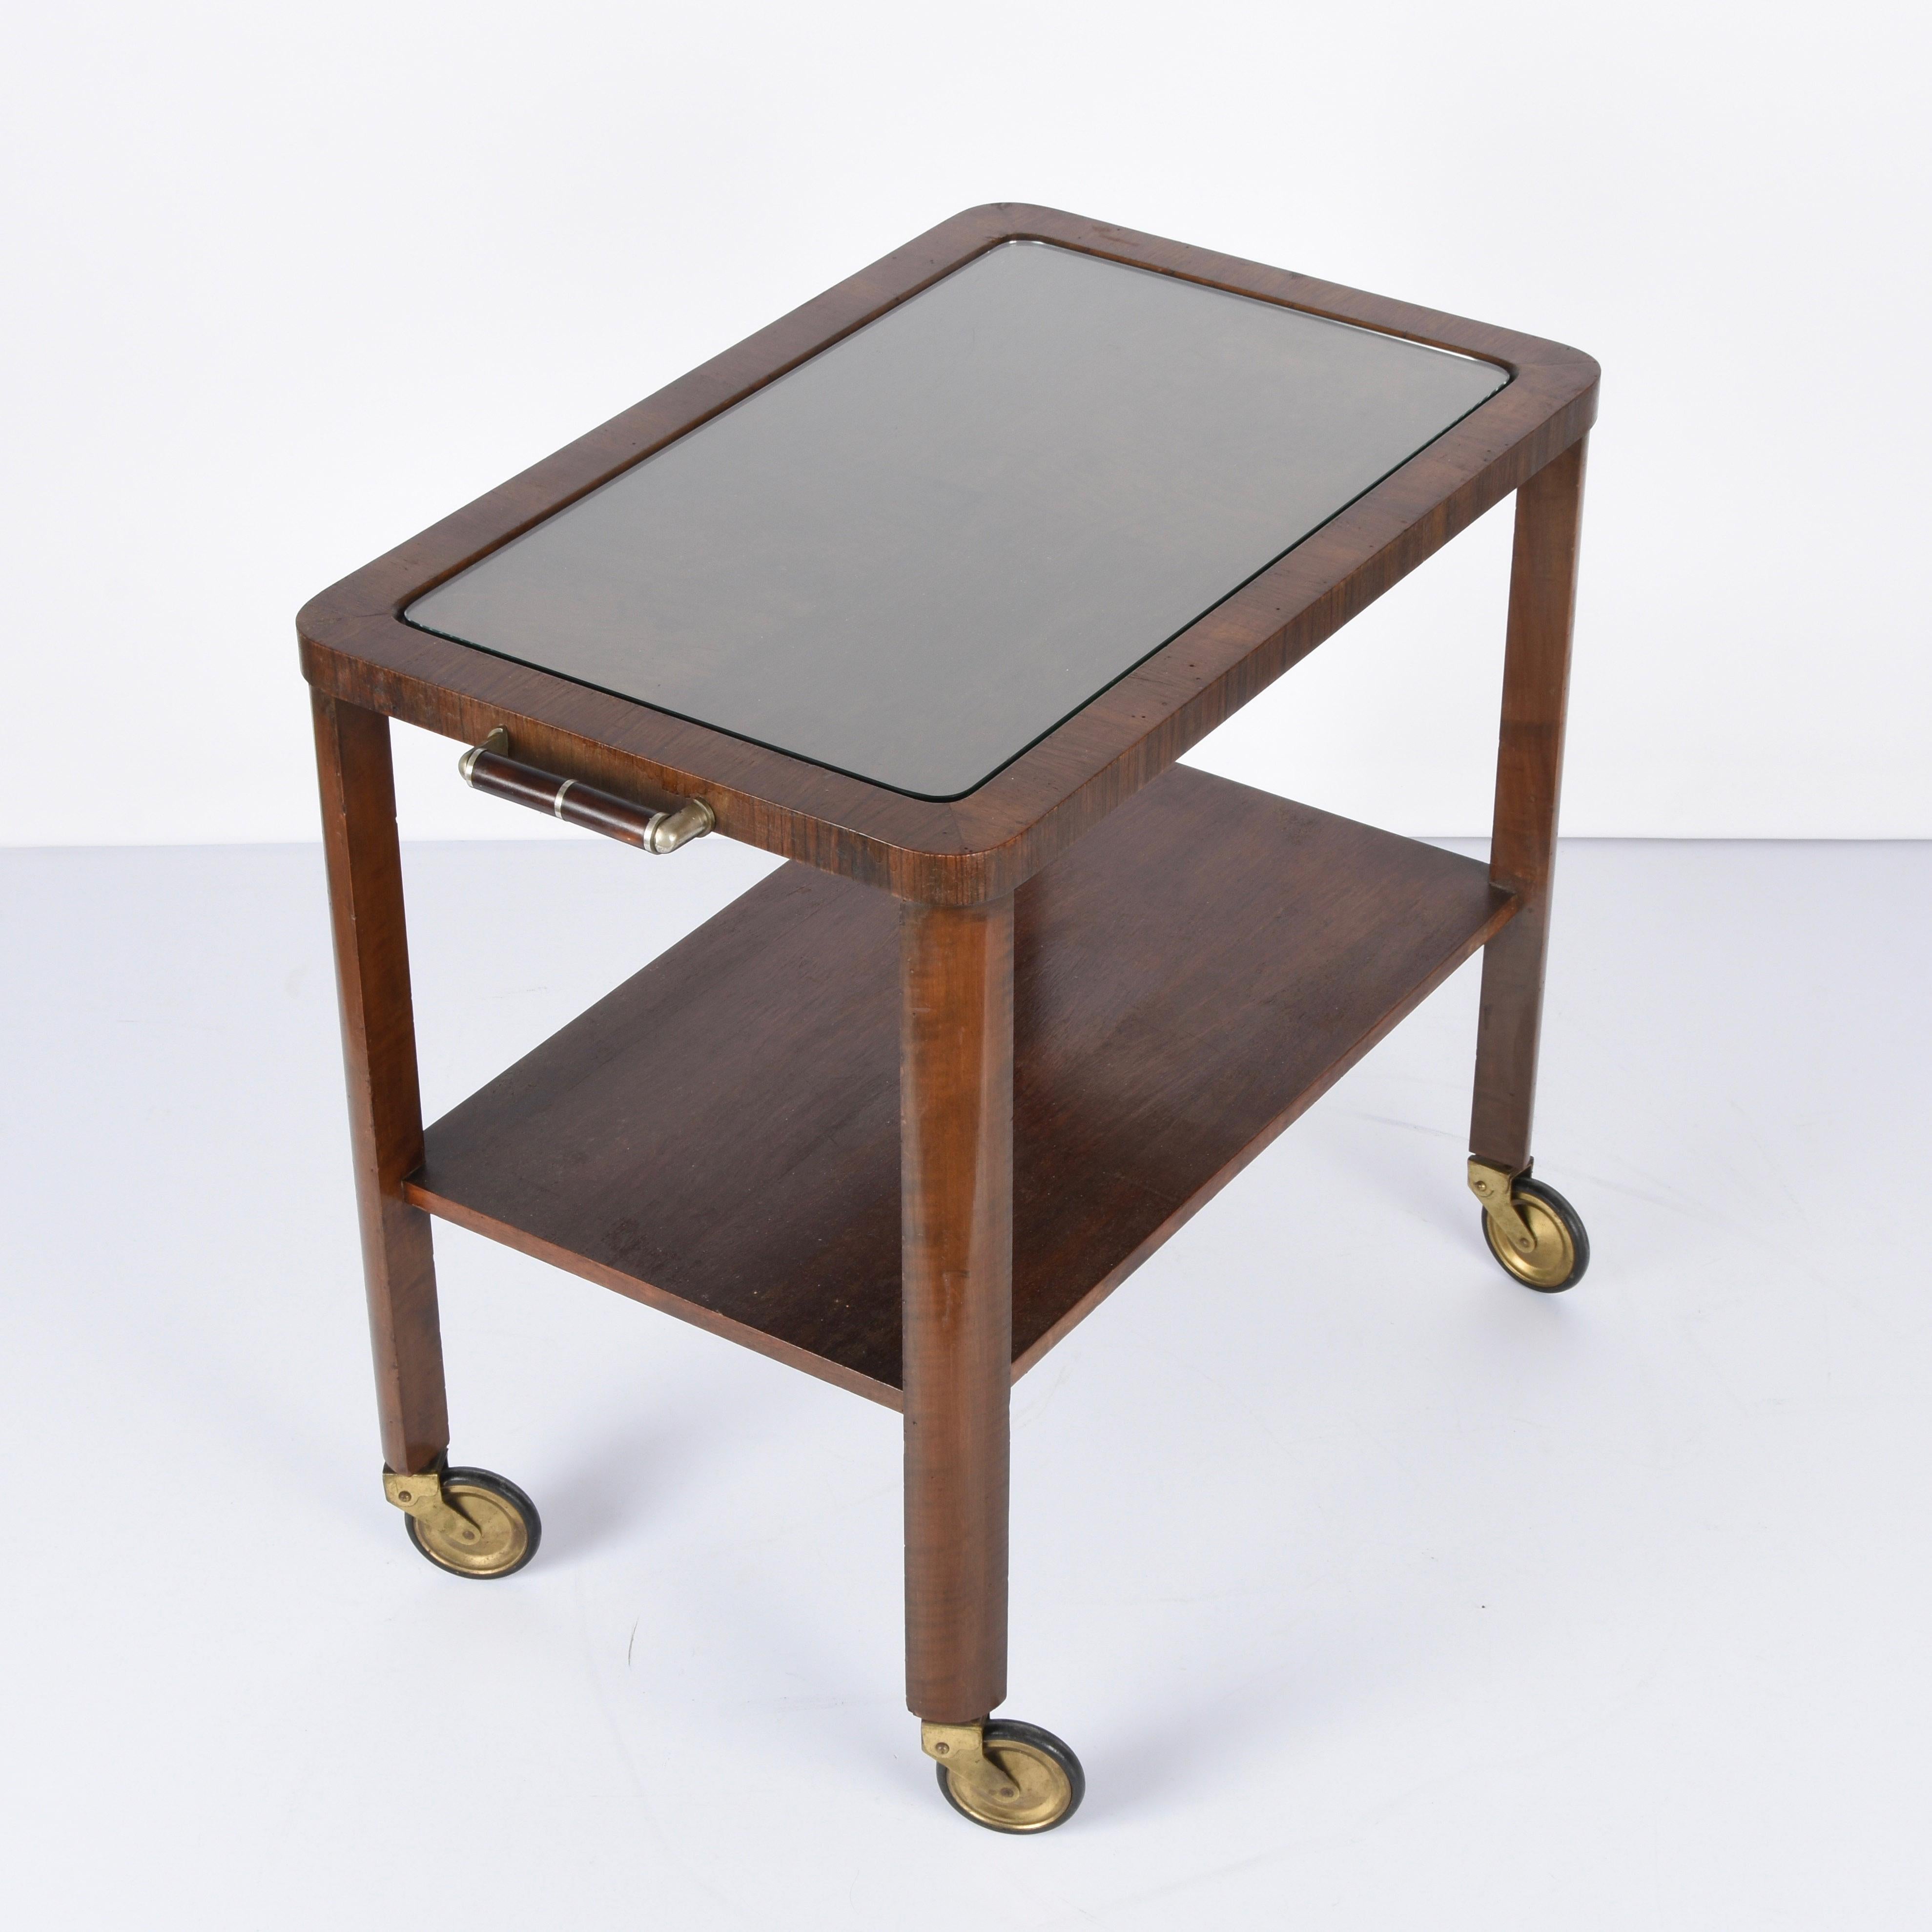 Mid-20th Century Art Deco Solid Walnut Wood and Glass Two-Levels Italian Trolley Bar Cart, 1940s For Sale